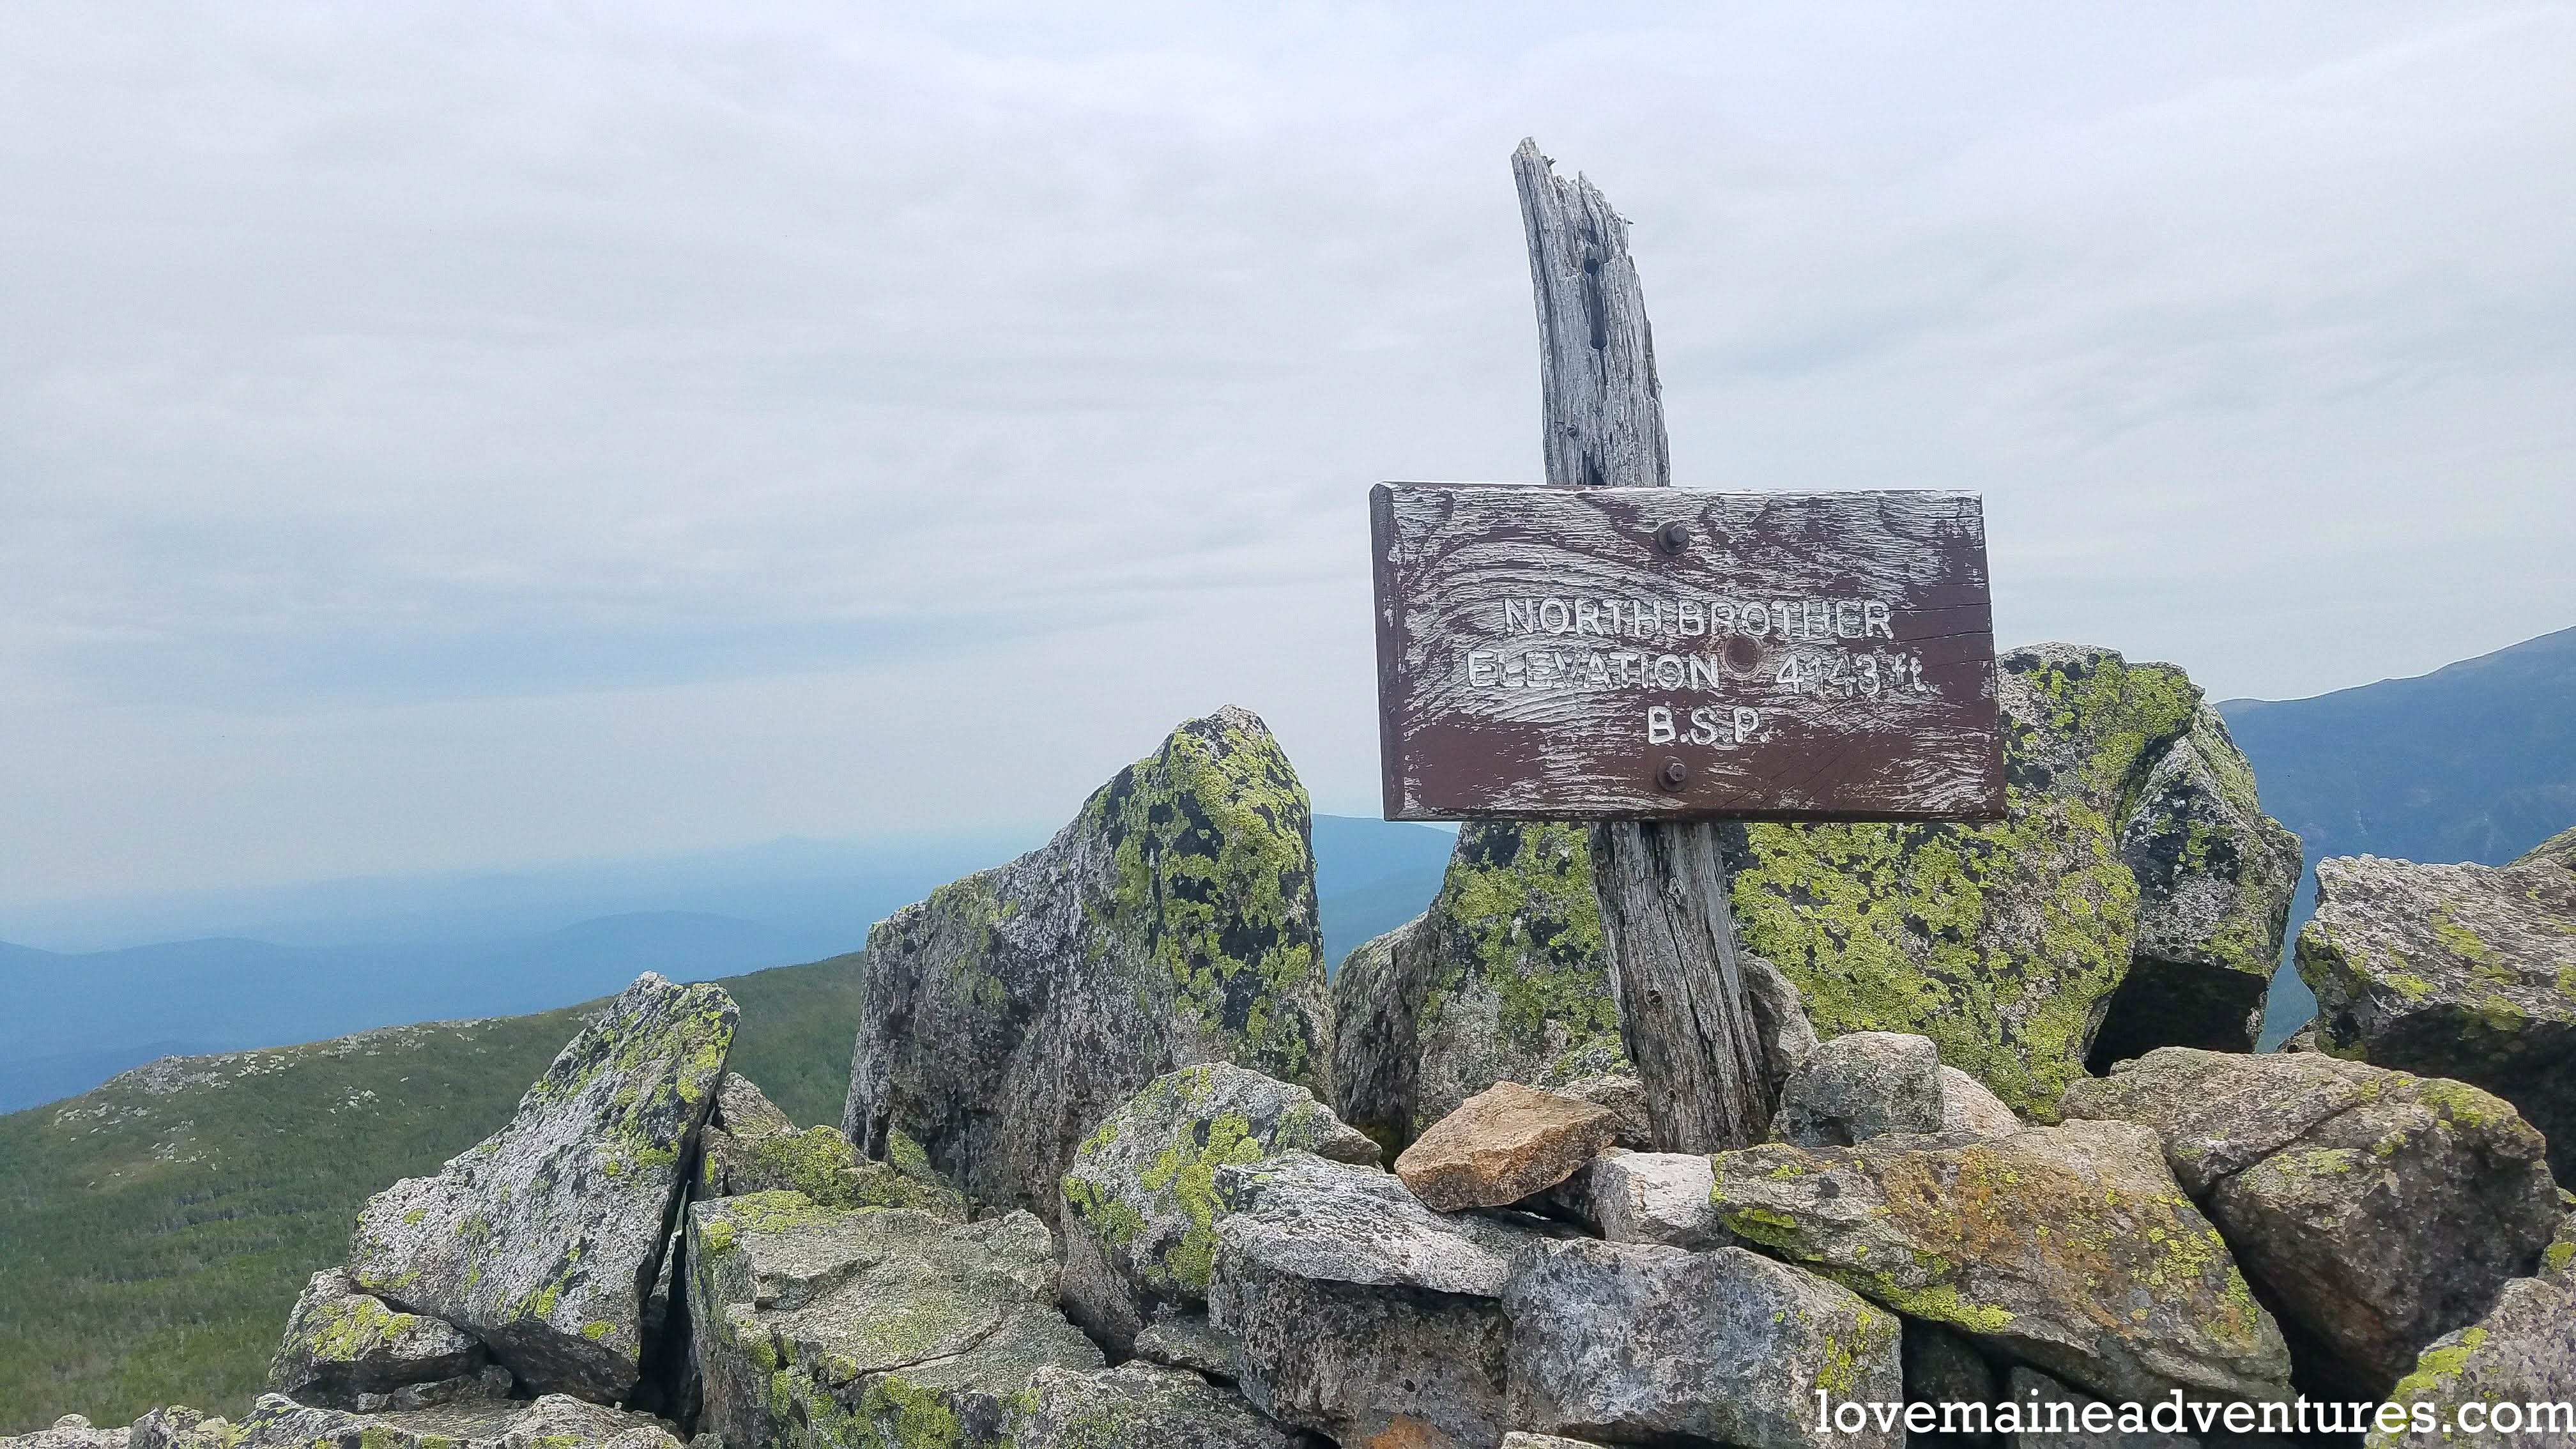 You are currently viewing North Brother, a 4,000 footer in Baxter State Park